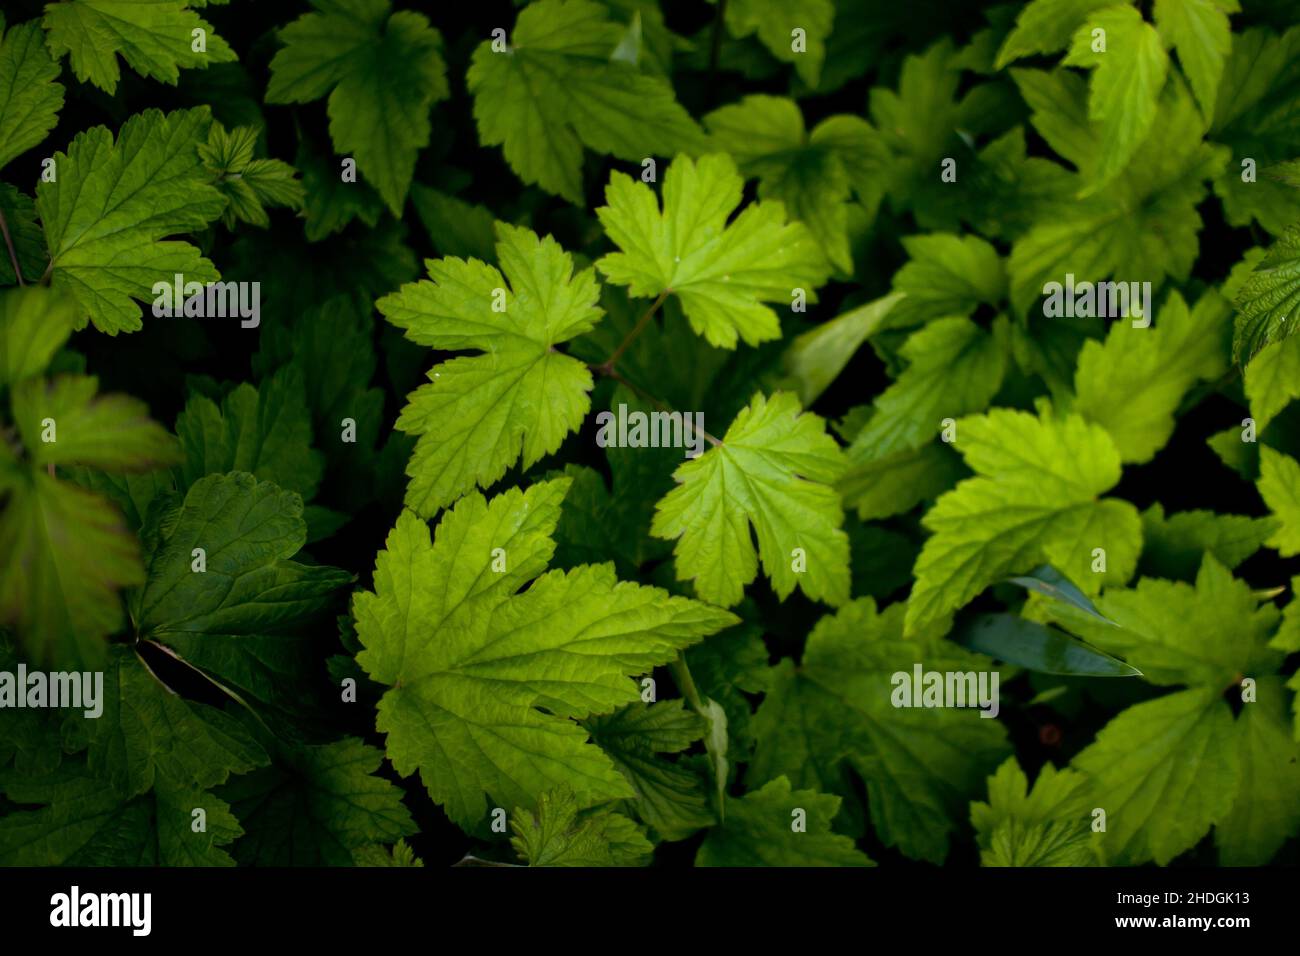 green, anemone flower, greens, anemone flowers, buttercup family Stock Photo